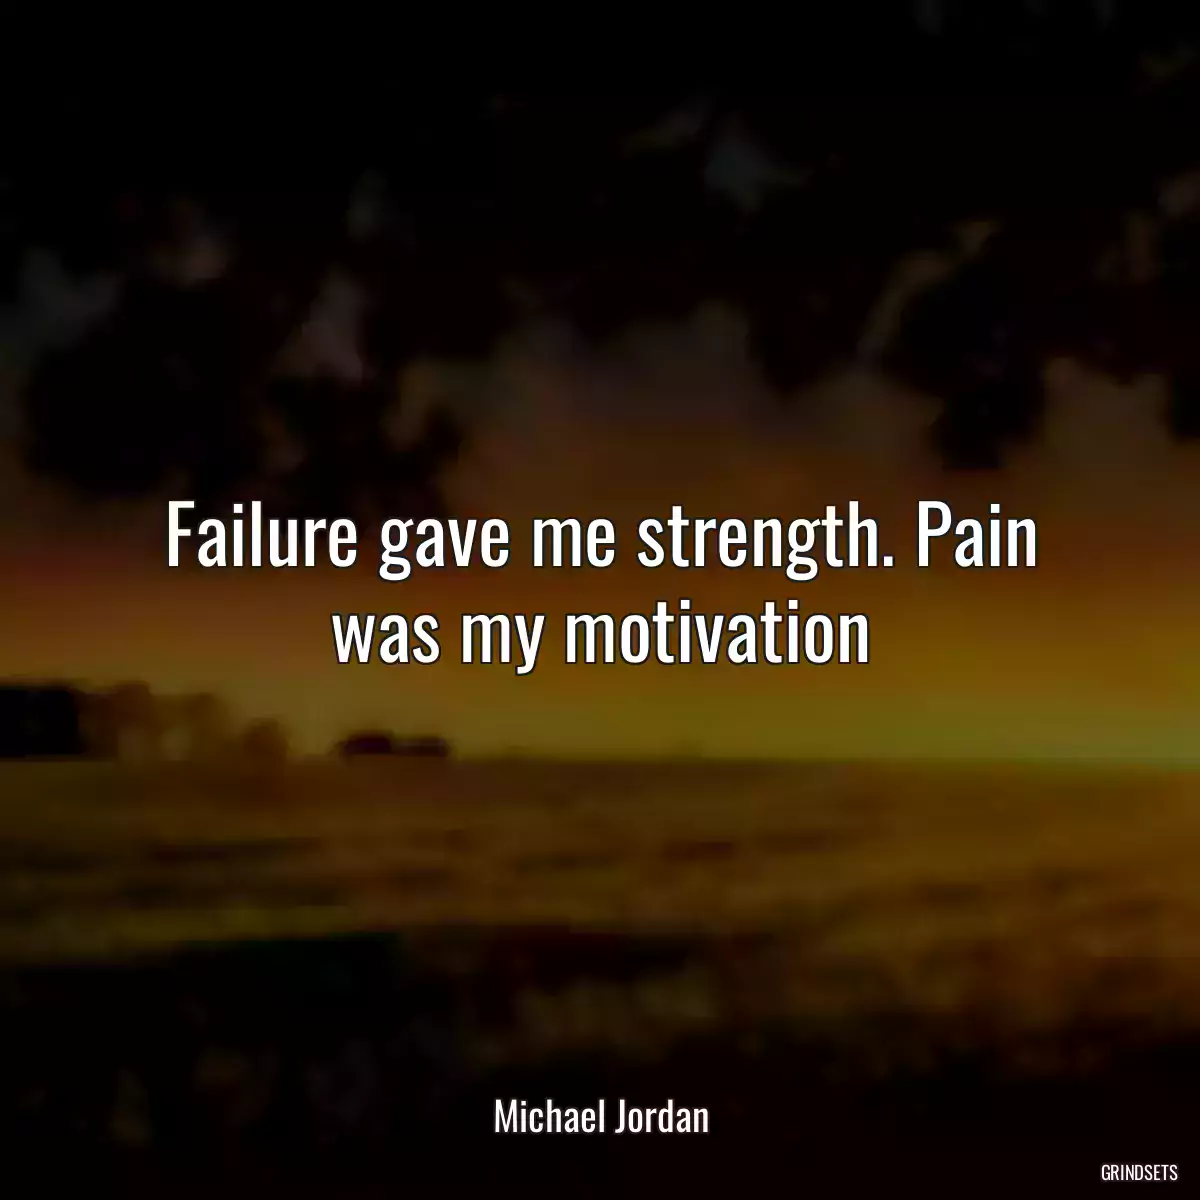 Failure gave me strength. Pain was my motivation